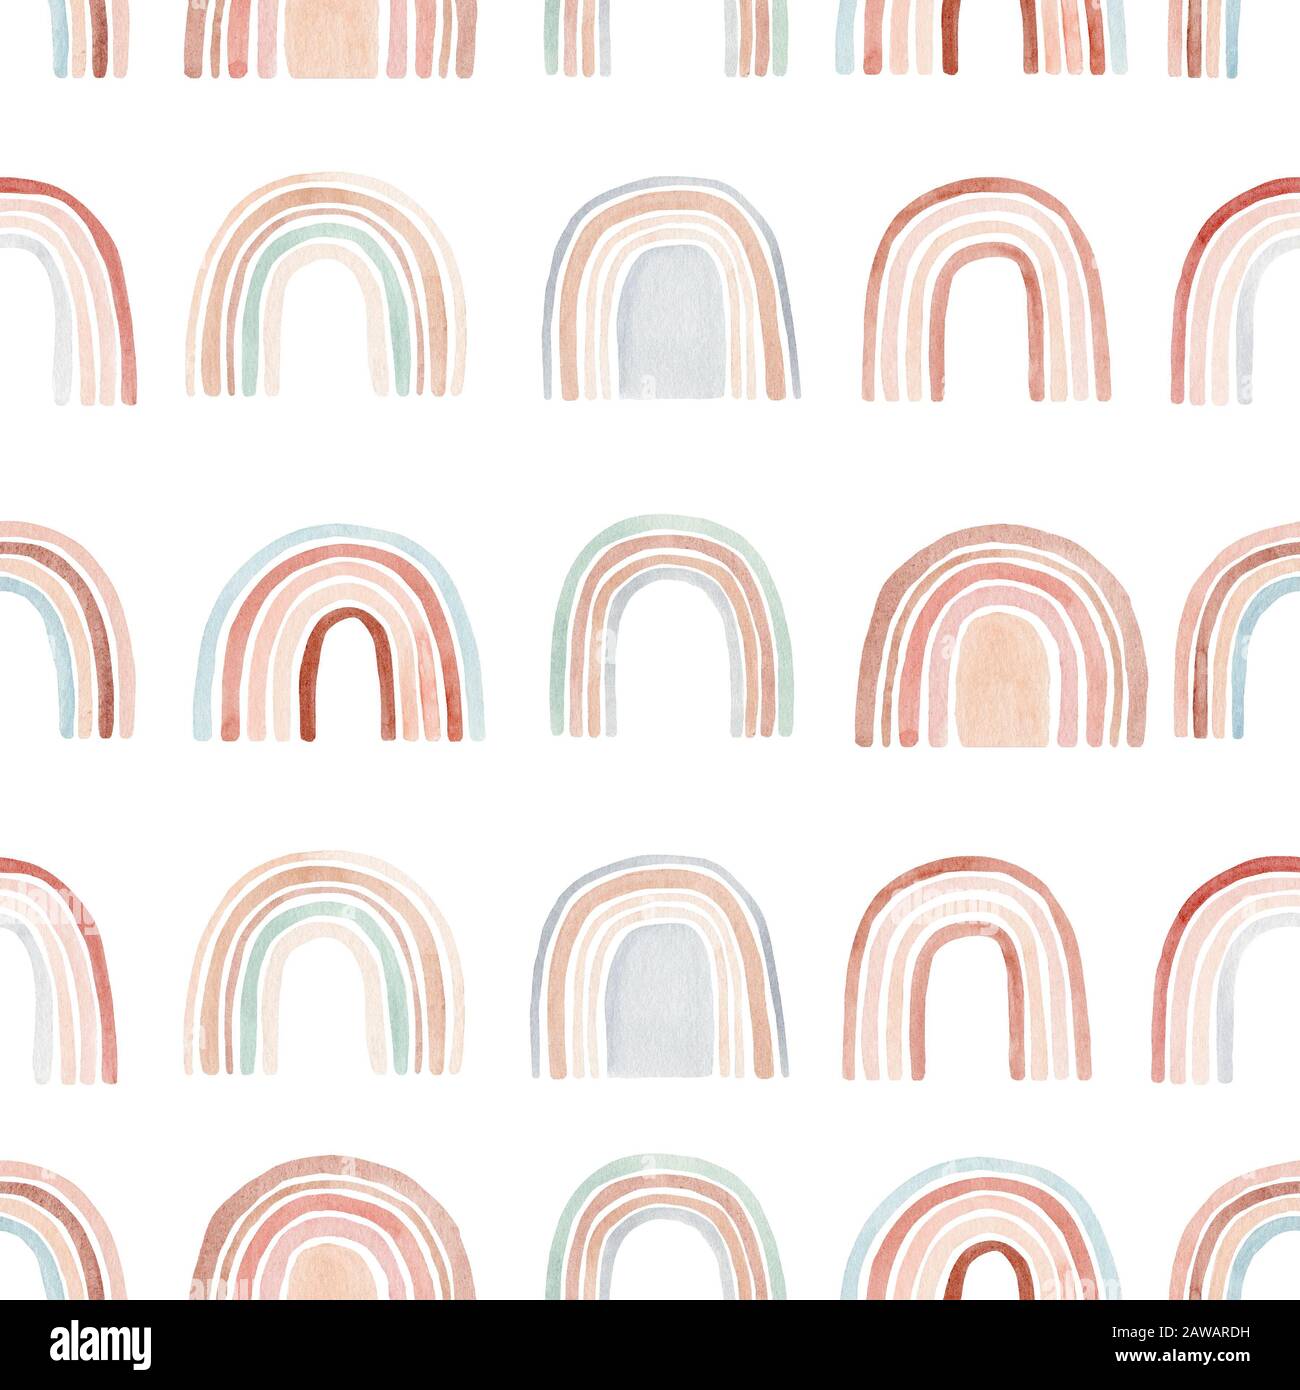 Watercolor Seamless Pattern With Rainbows In Warm Pastel Colors Hand Drawn Cute Abstract Background Digital Paper Perfect For Kids Fabric Textile An Stock Photo Alamy